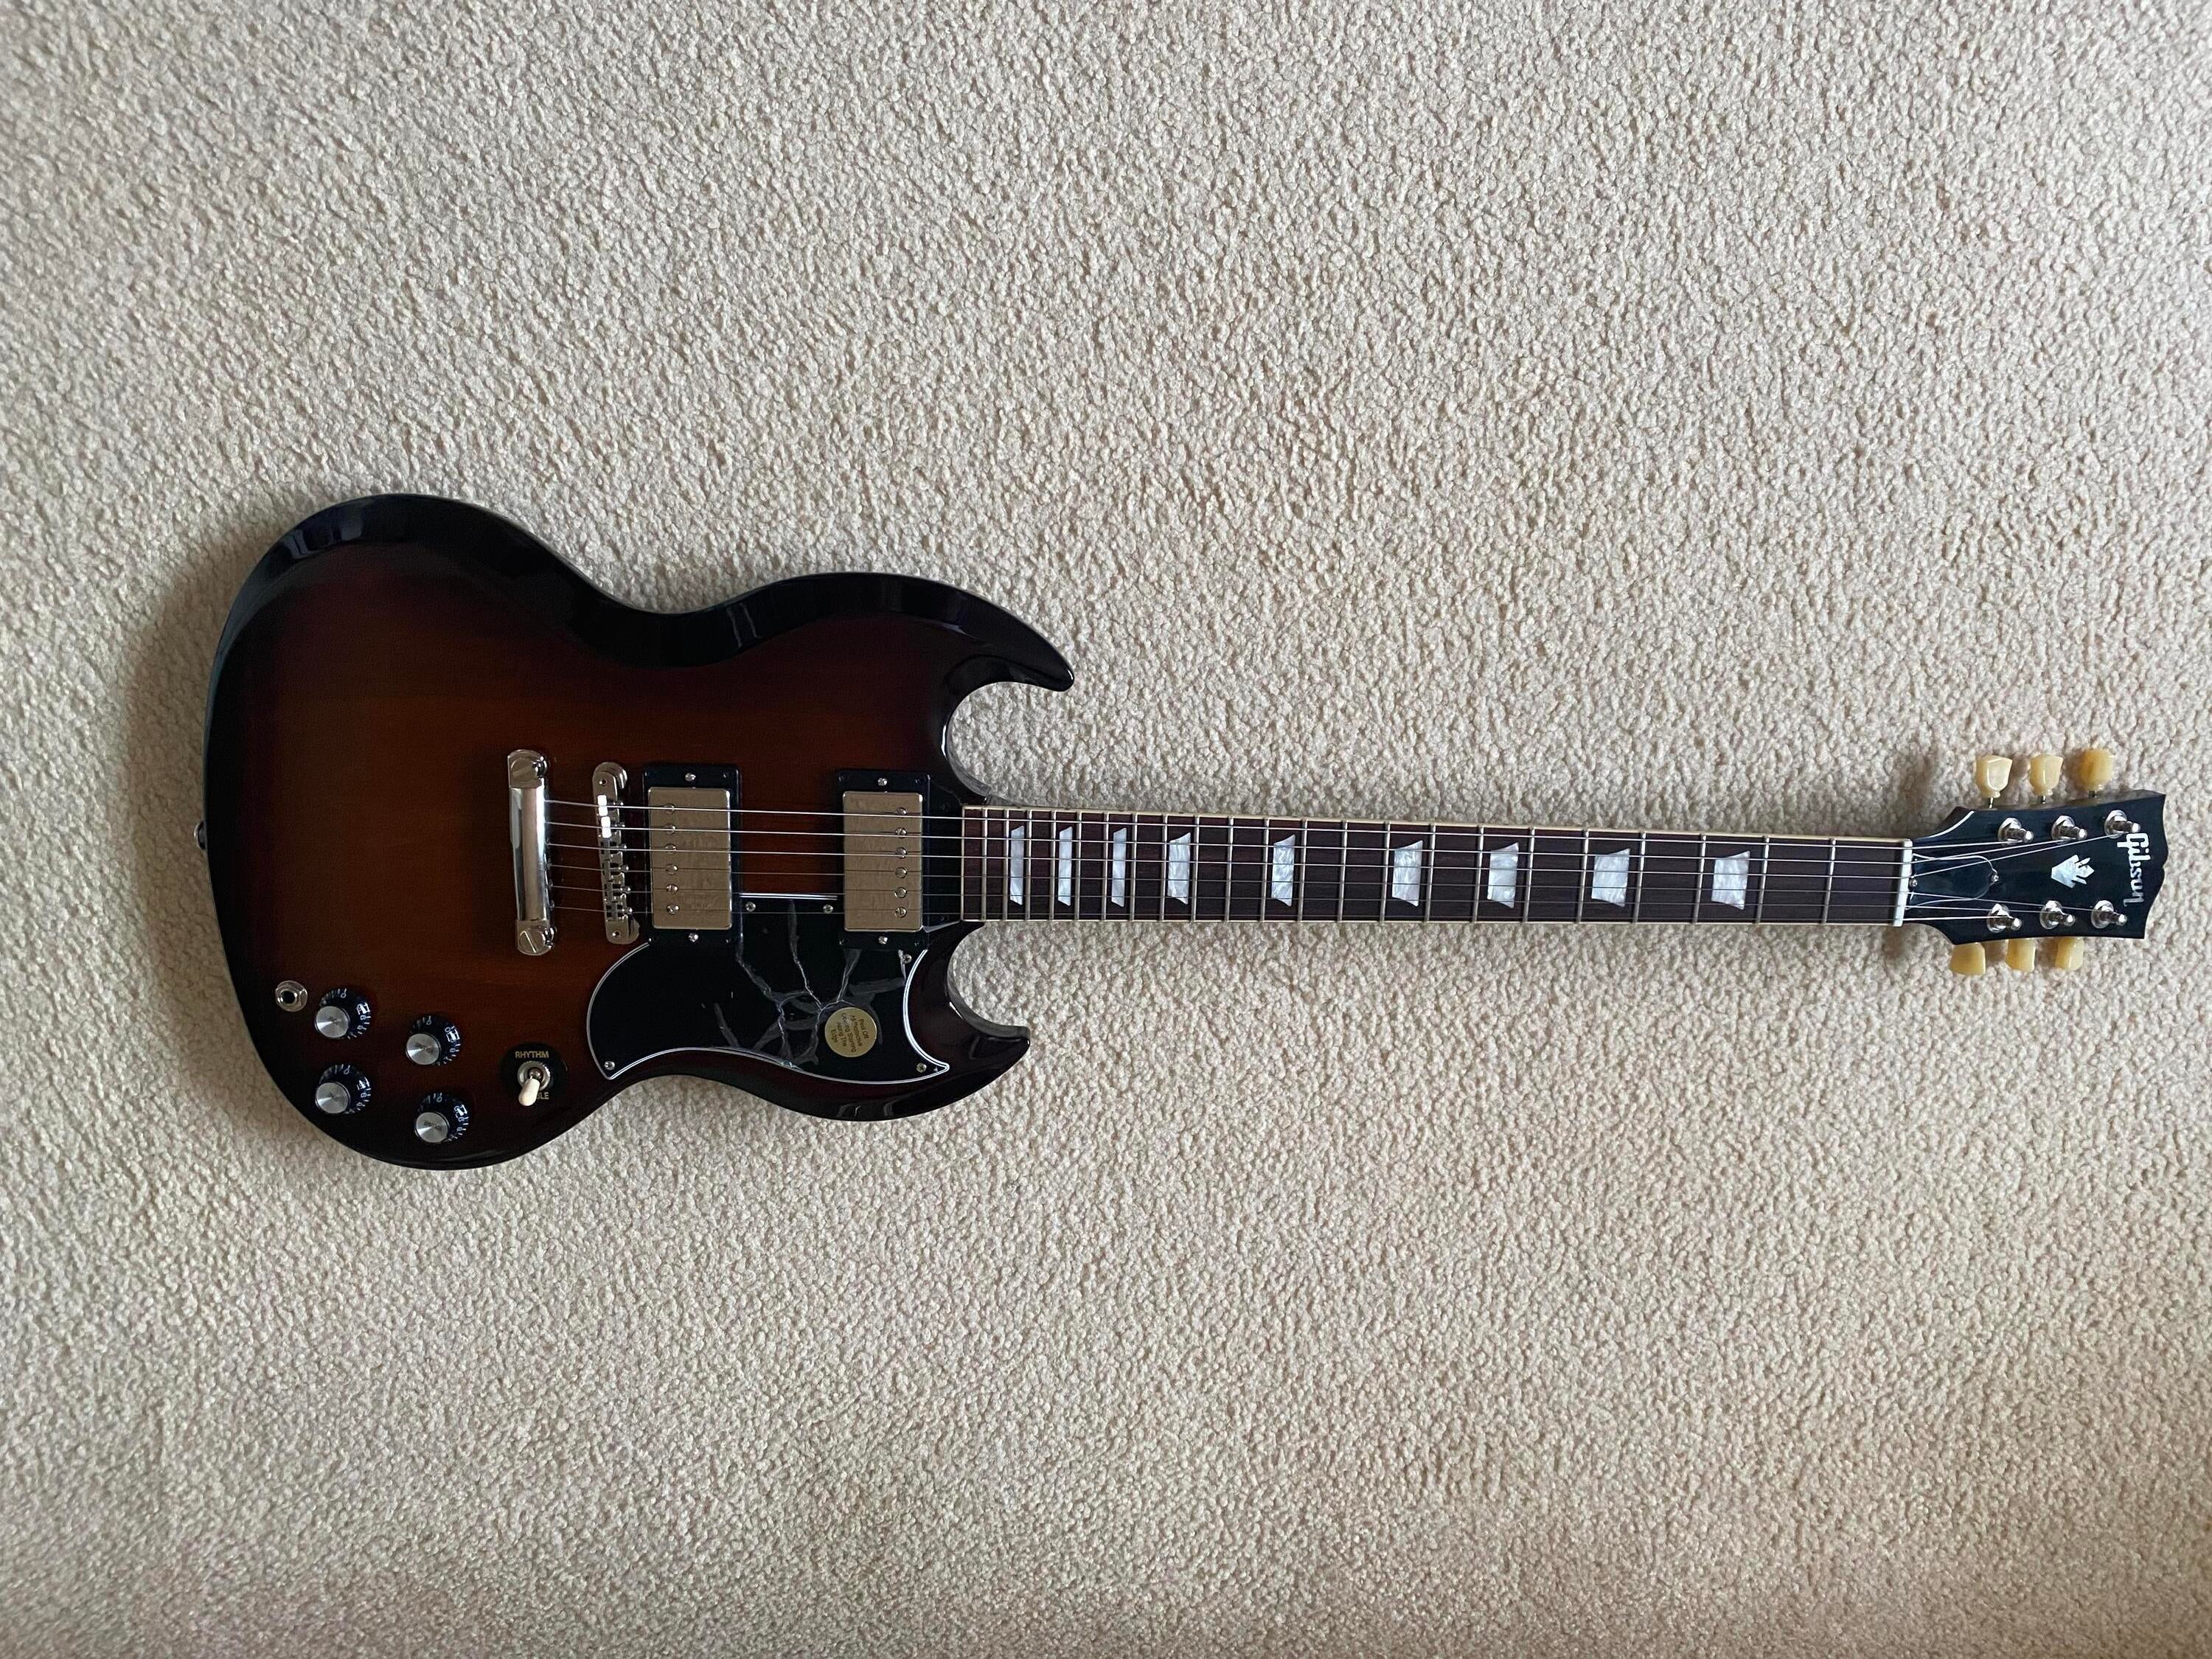 Used Gibson SG Standard 61 2023 Tobacco - Sweetwater's Gear Exchange